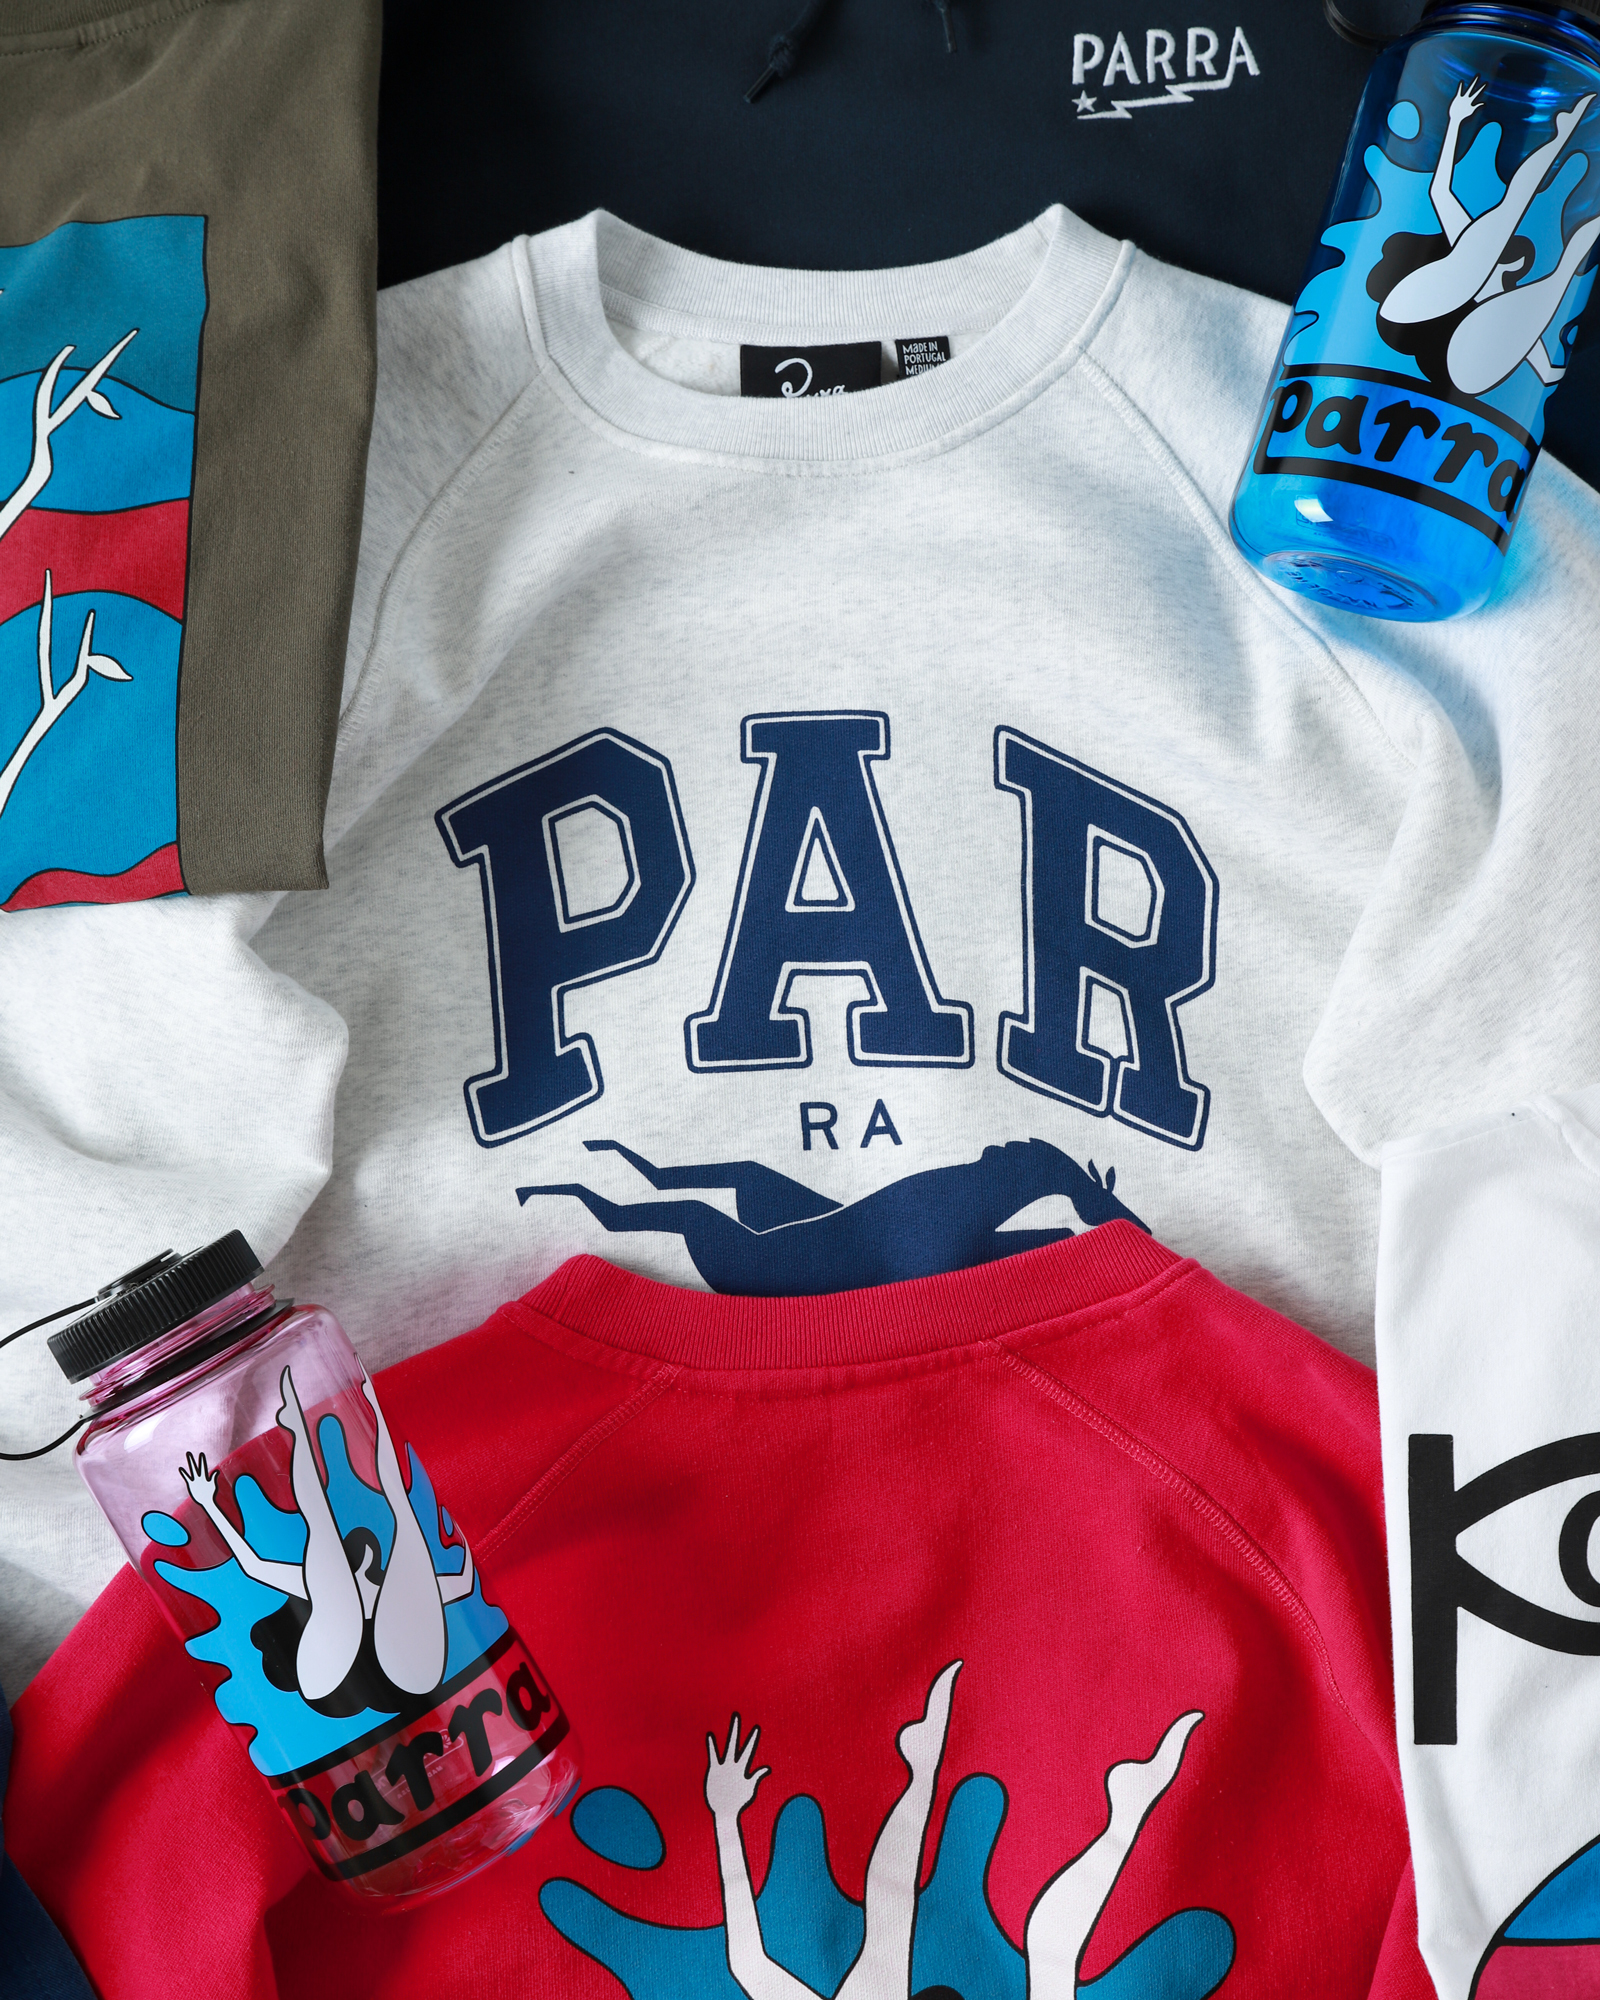 Don’t sleep: By Parra is here